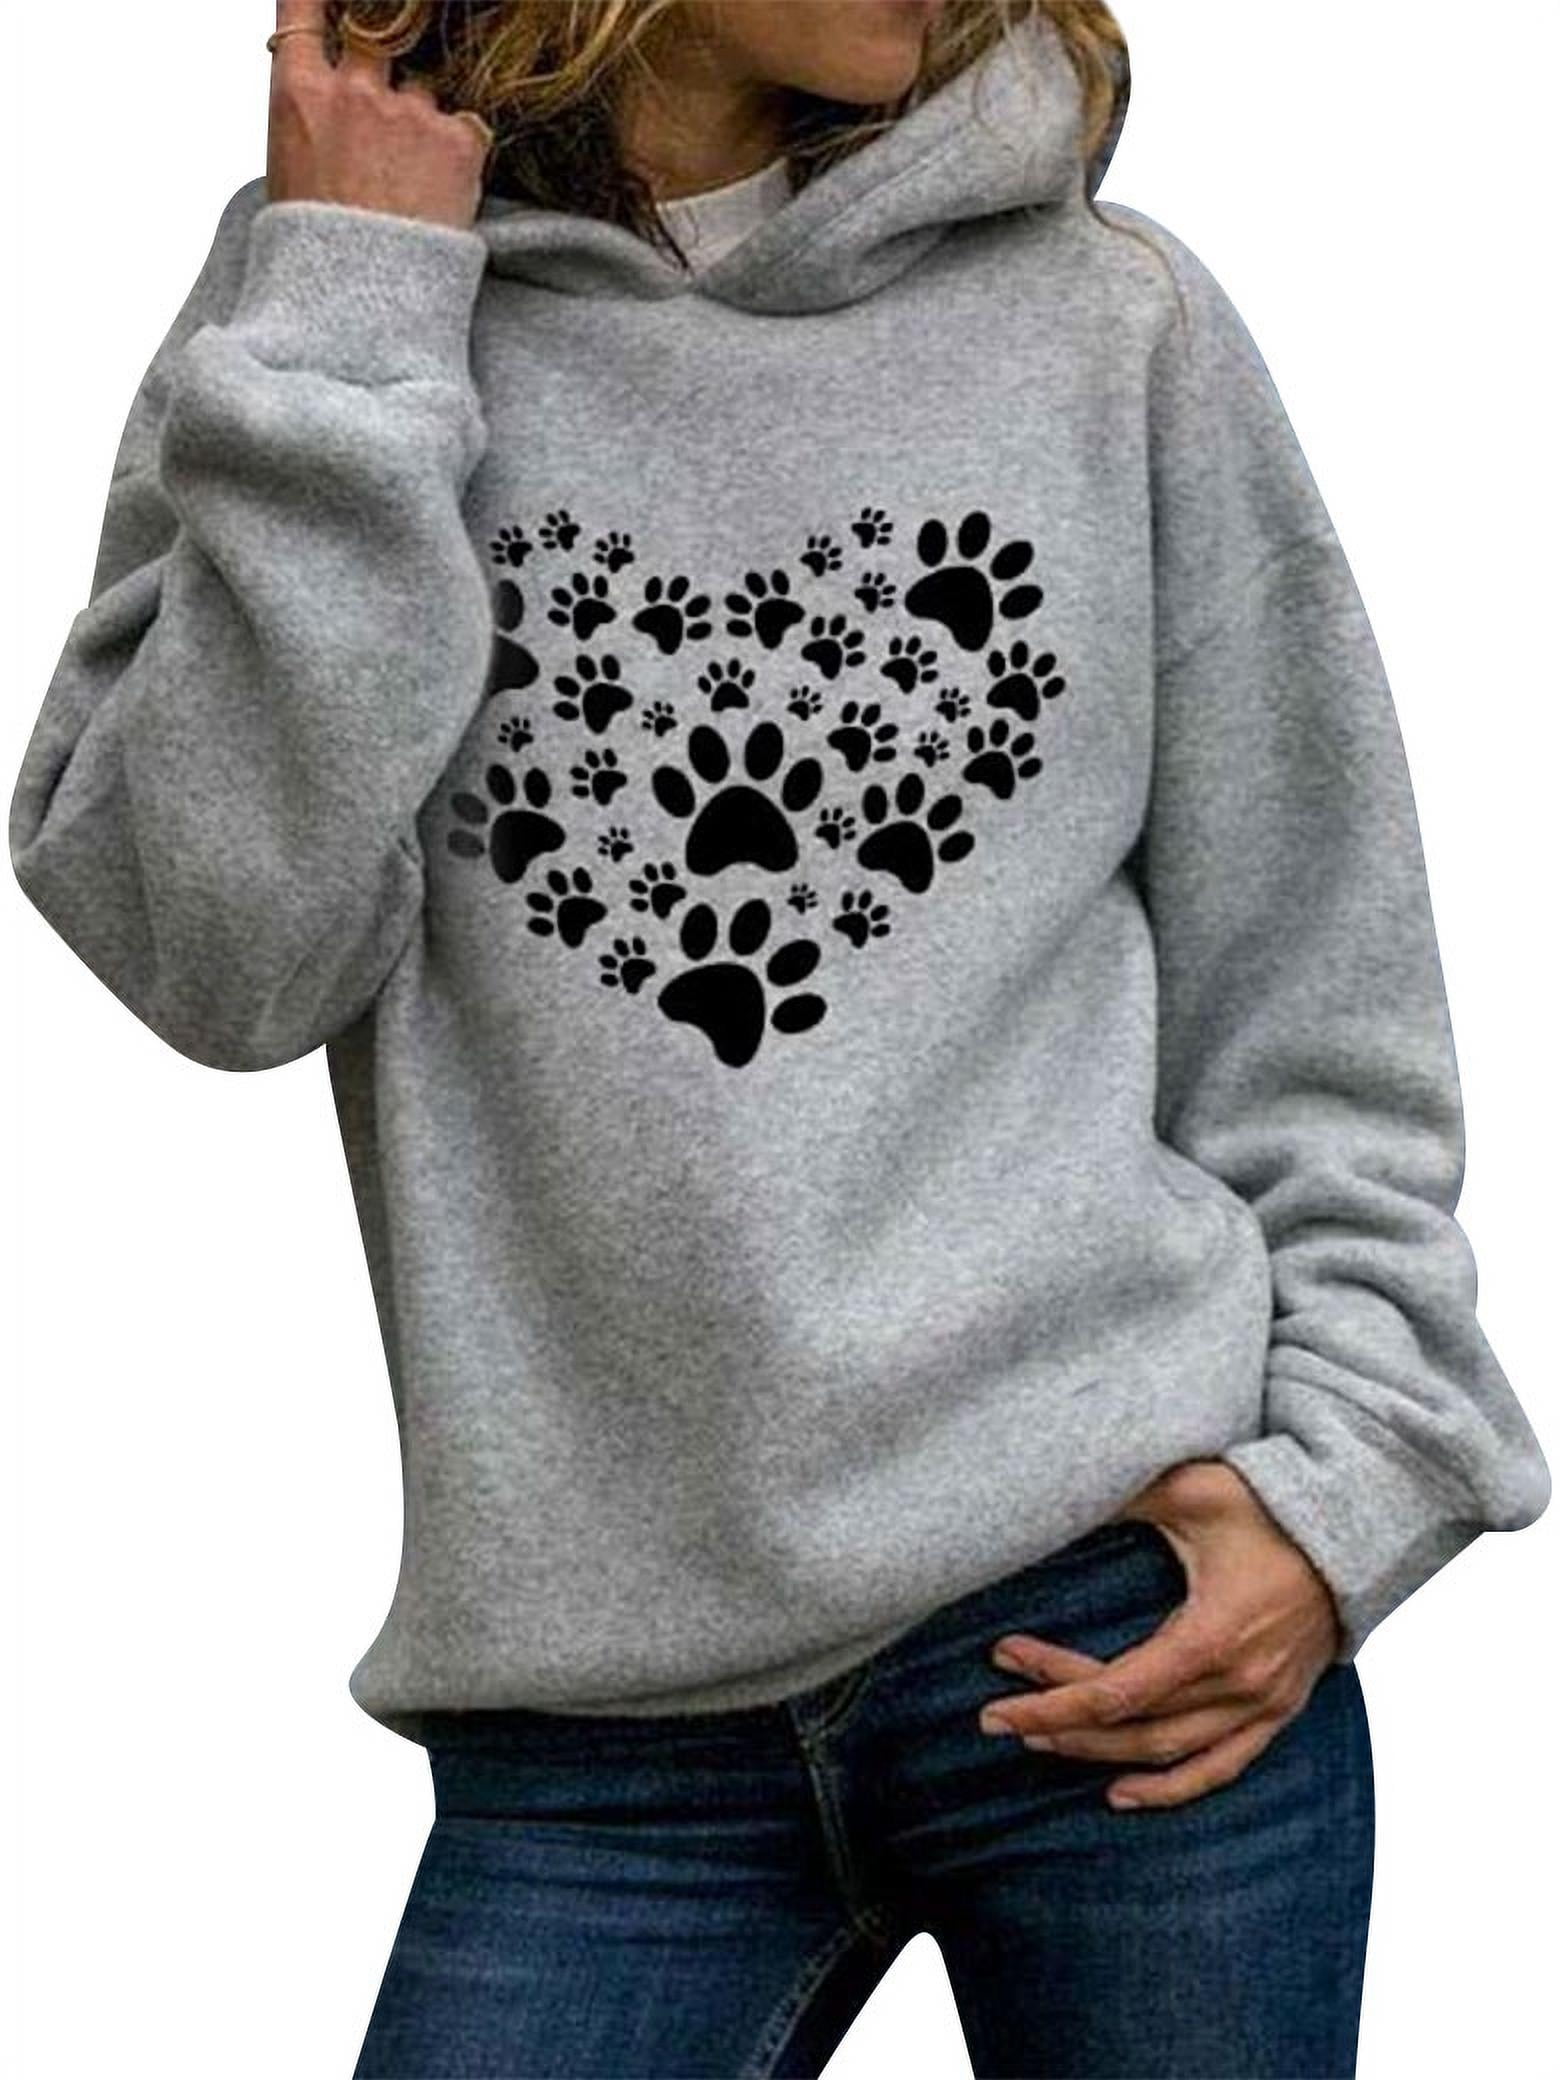 Hibasing Womens Long Sleeve Tops Cat Paw Print Round Neck Loose Graphic T-Shirts Blouse Pullover Sweatshirts with Plus Size 